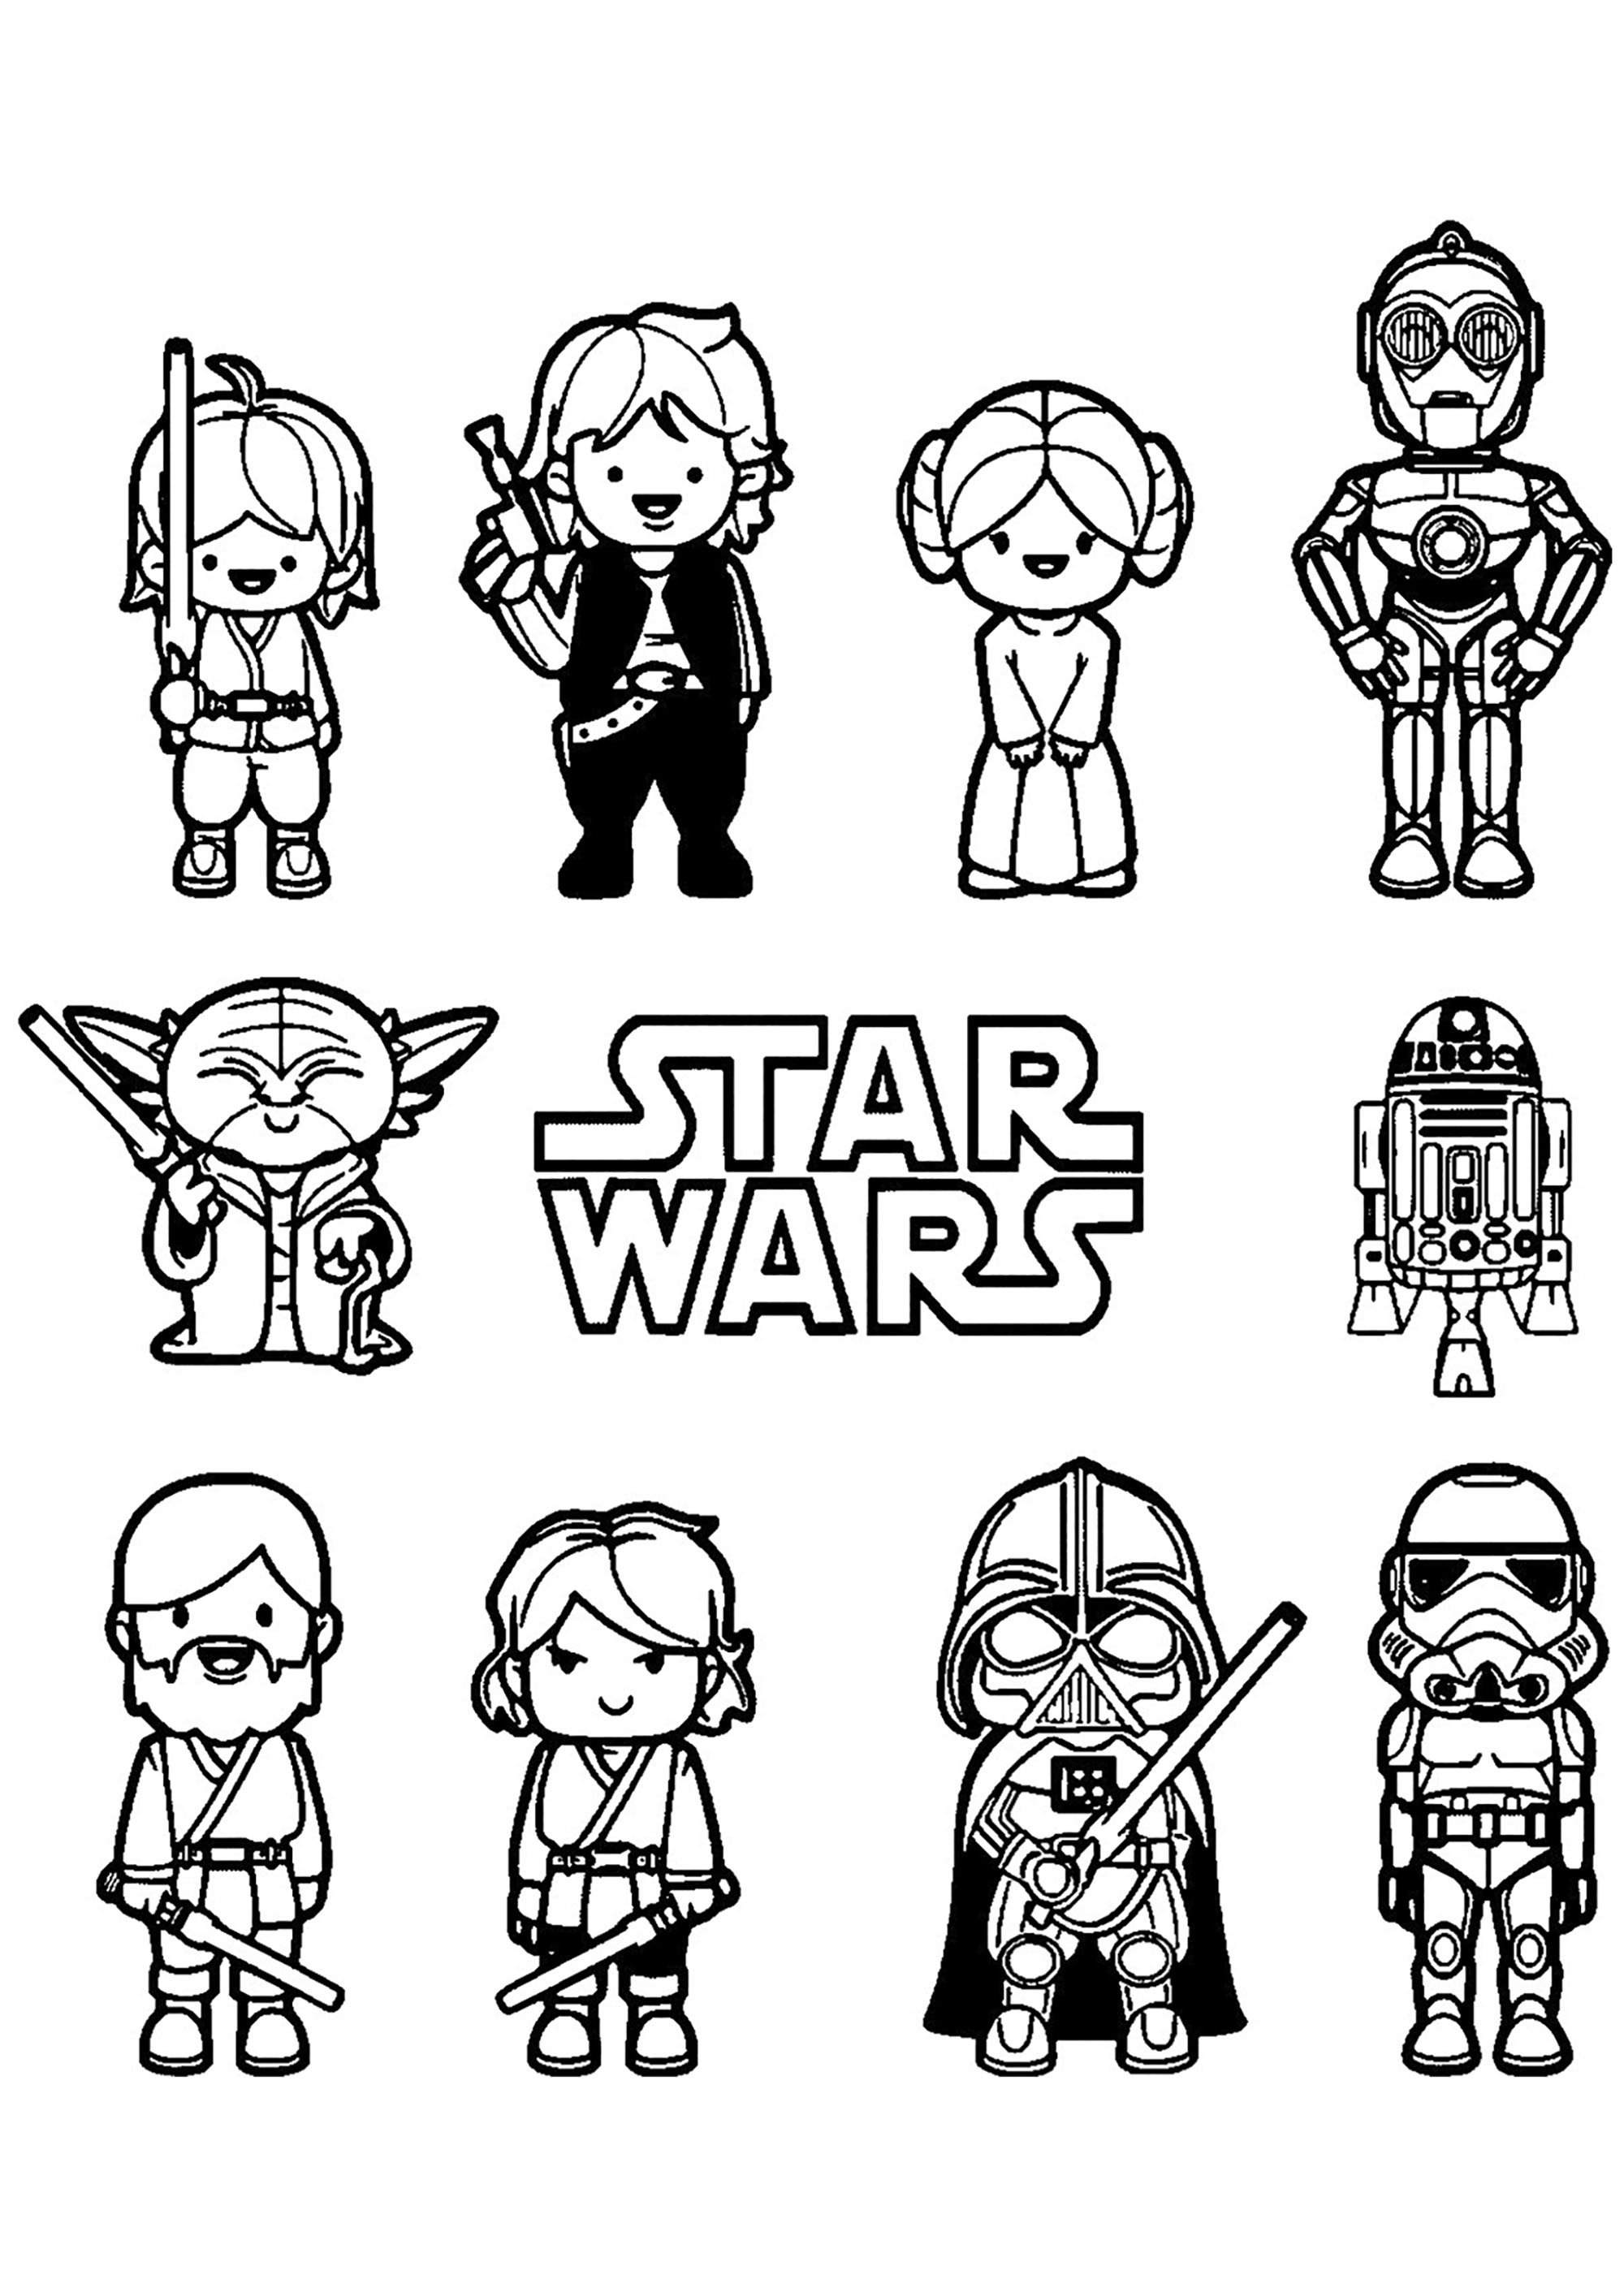 small-star-wars-characters-star-wars-kids-coloring-pages